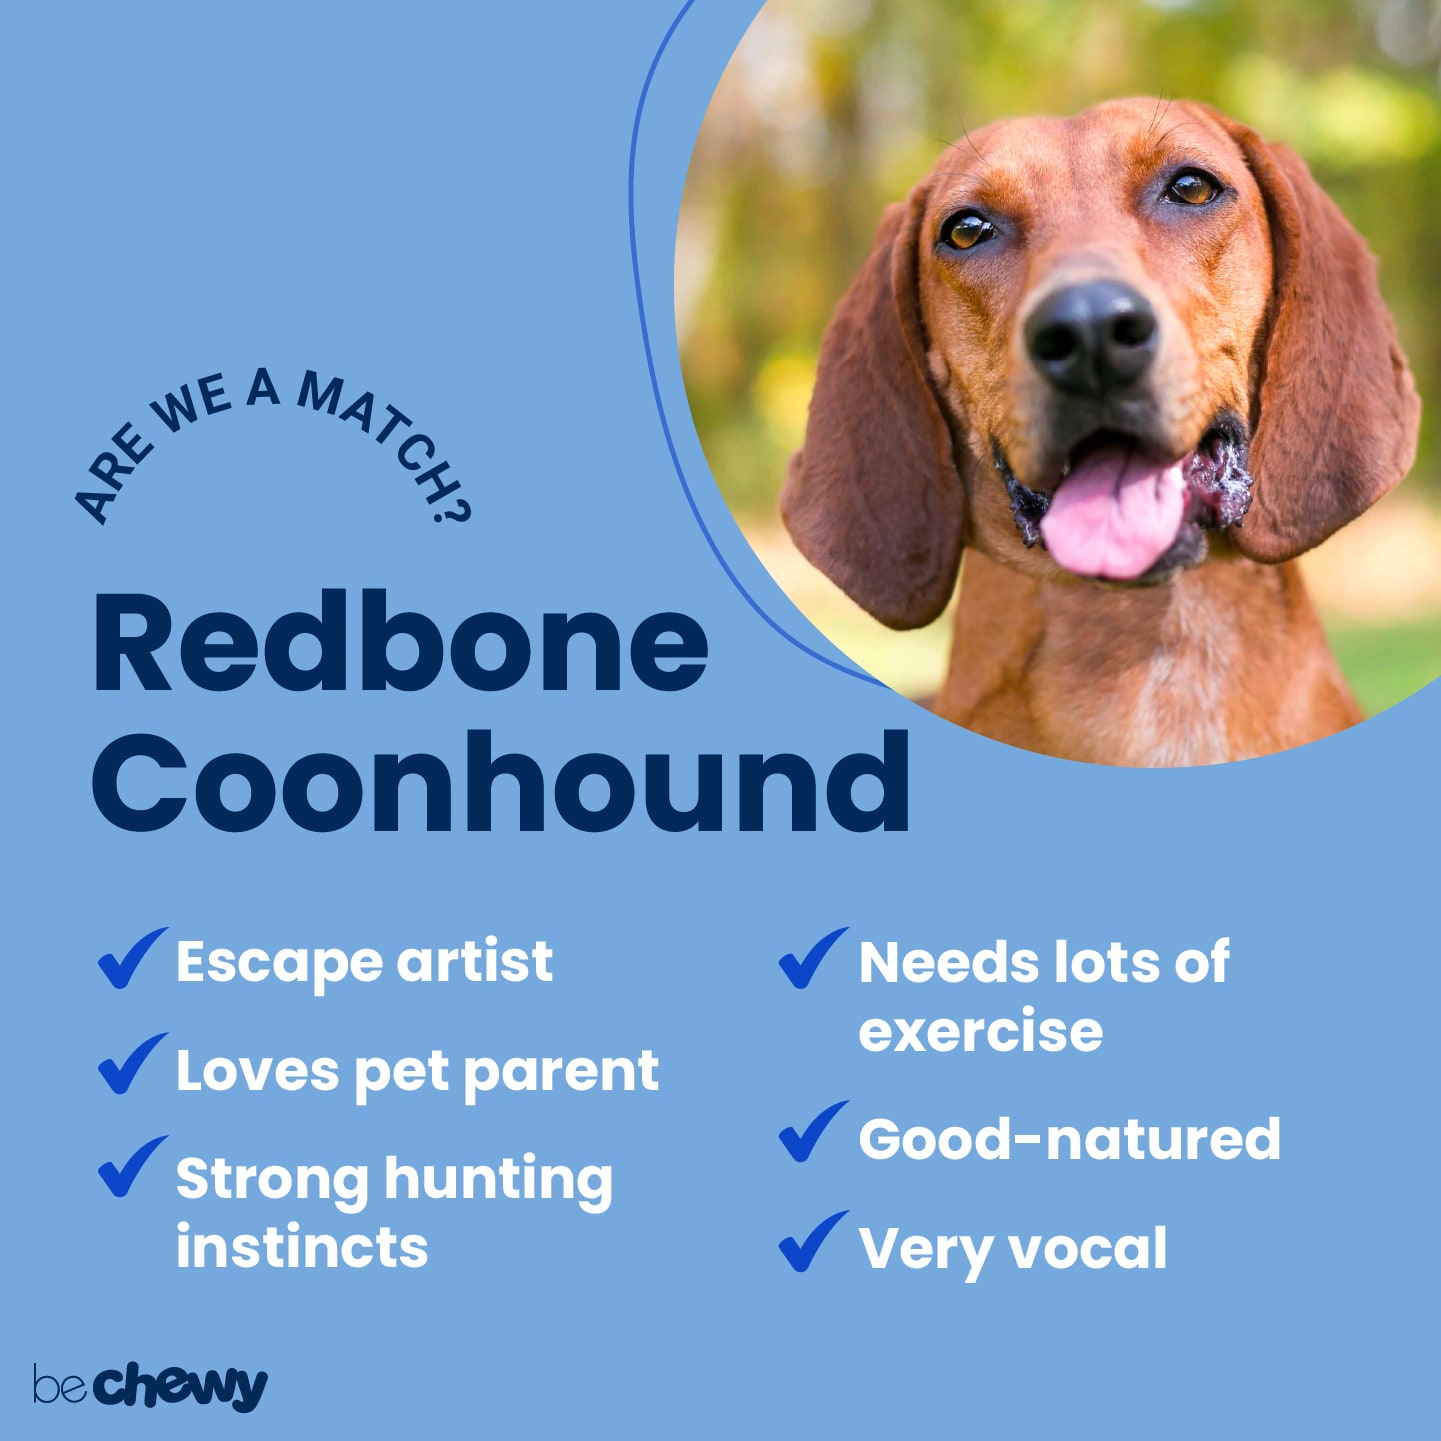 are coonhound aggressive